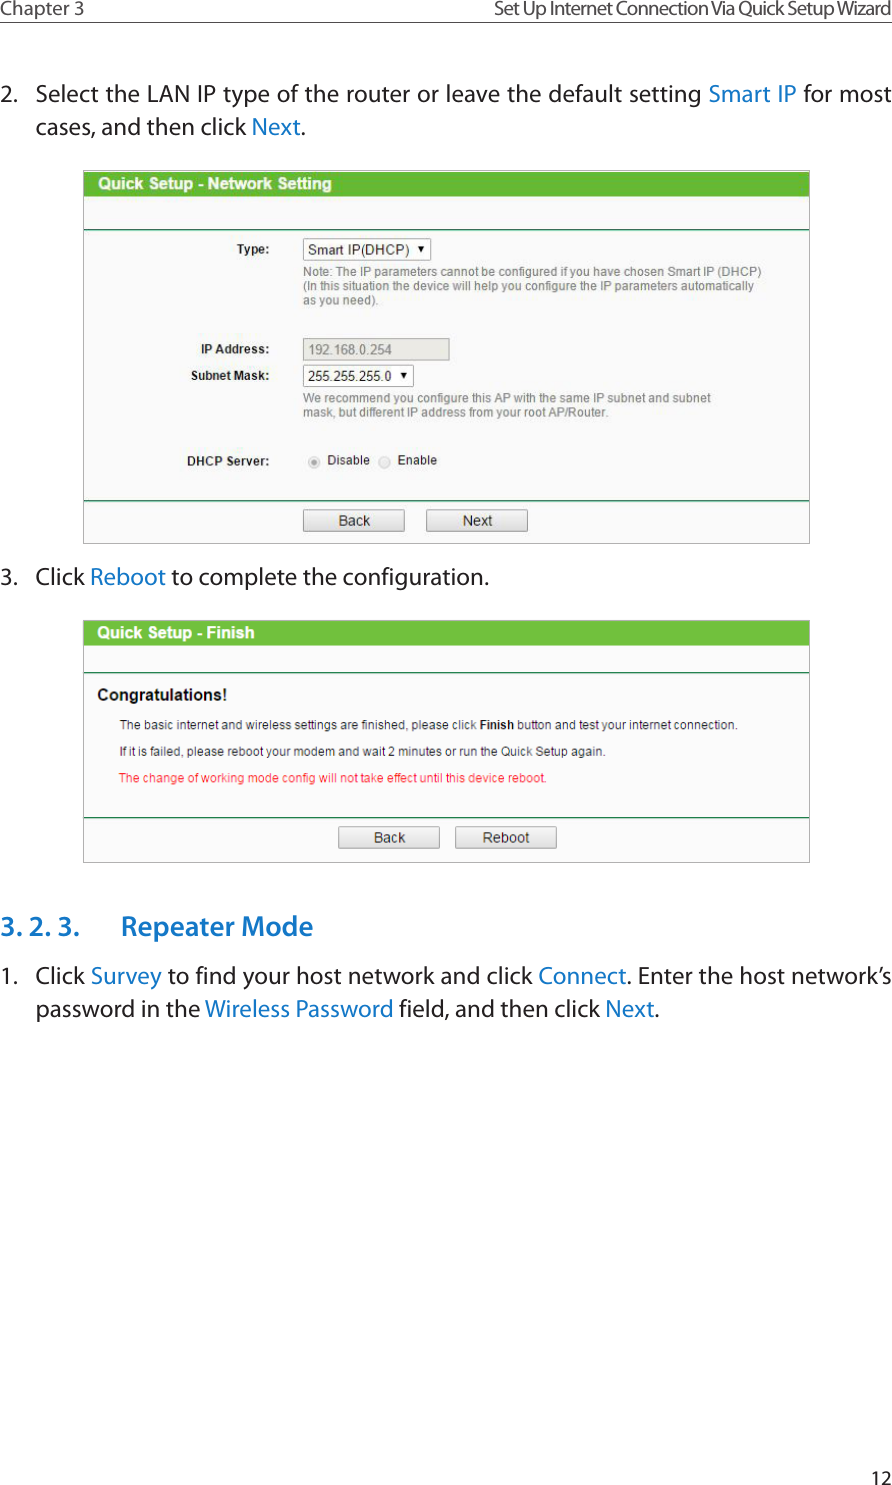 12Chapter 3 Set Up Internet Connection Via Quick Setup Wizard2.  Select the LAN IP type of the router or leave the default setting Smart IP for most cases, and then click Next.3.  Click Reboot to complete the configuration.3. 2. 3.  Repeater Mode1.  Click Survey to find your host network and click Connect. Enter the host network’s password in the Wireless Password field, and then click Next.